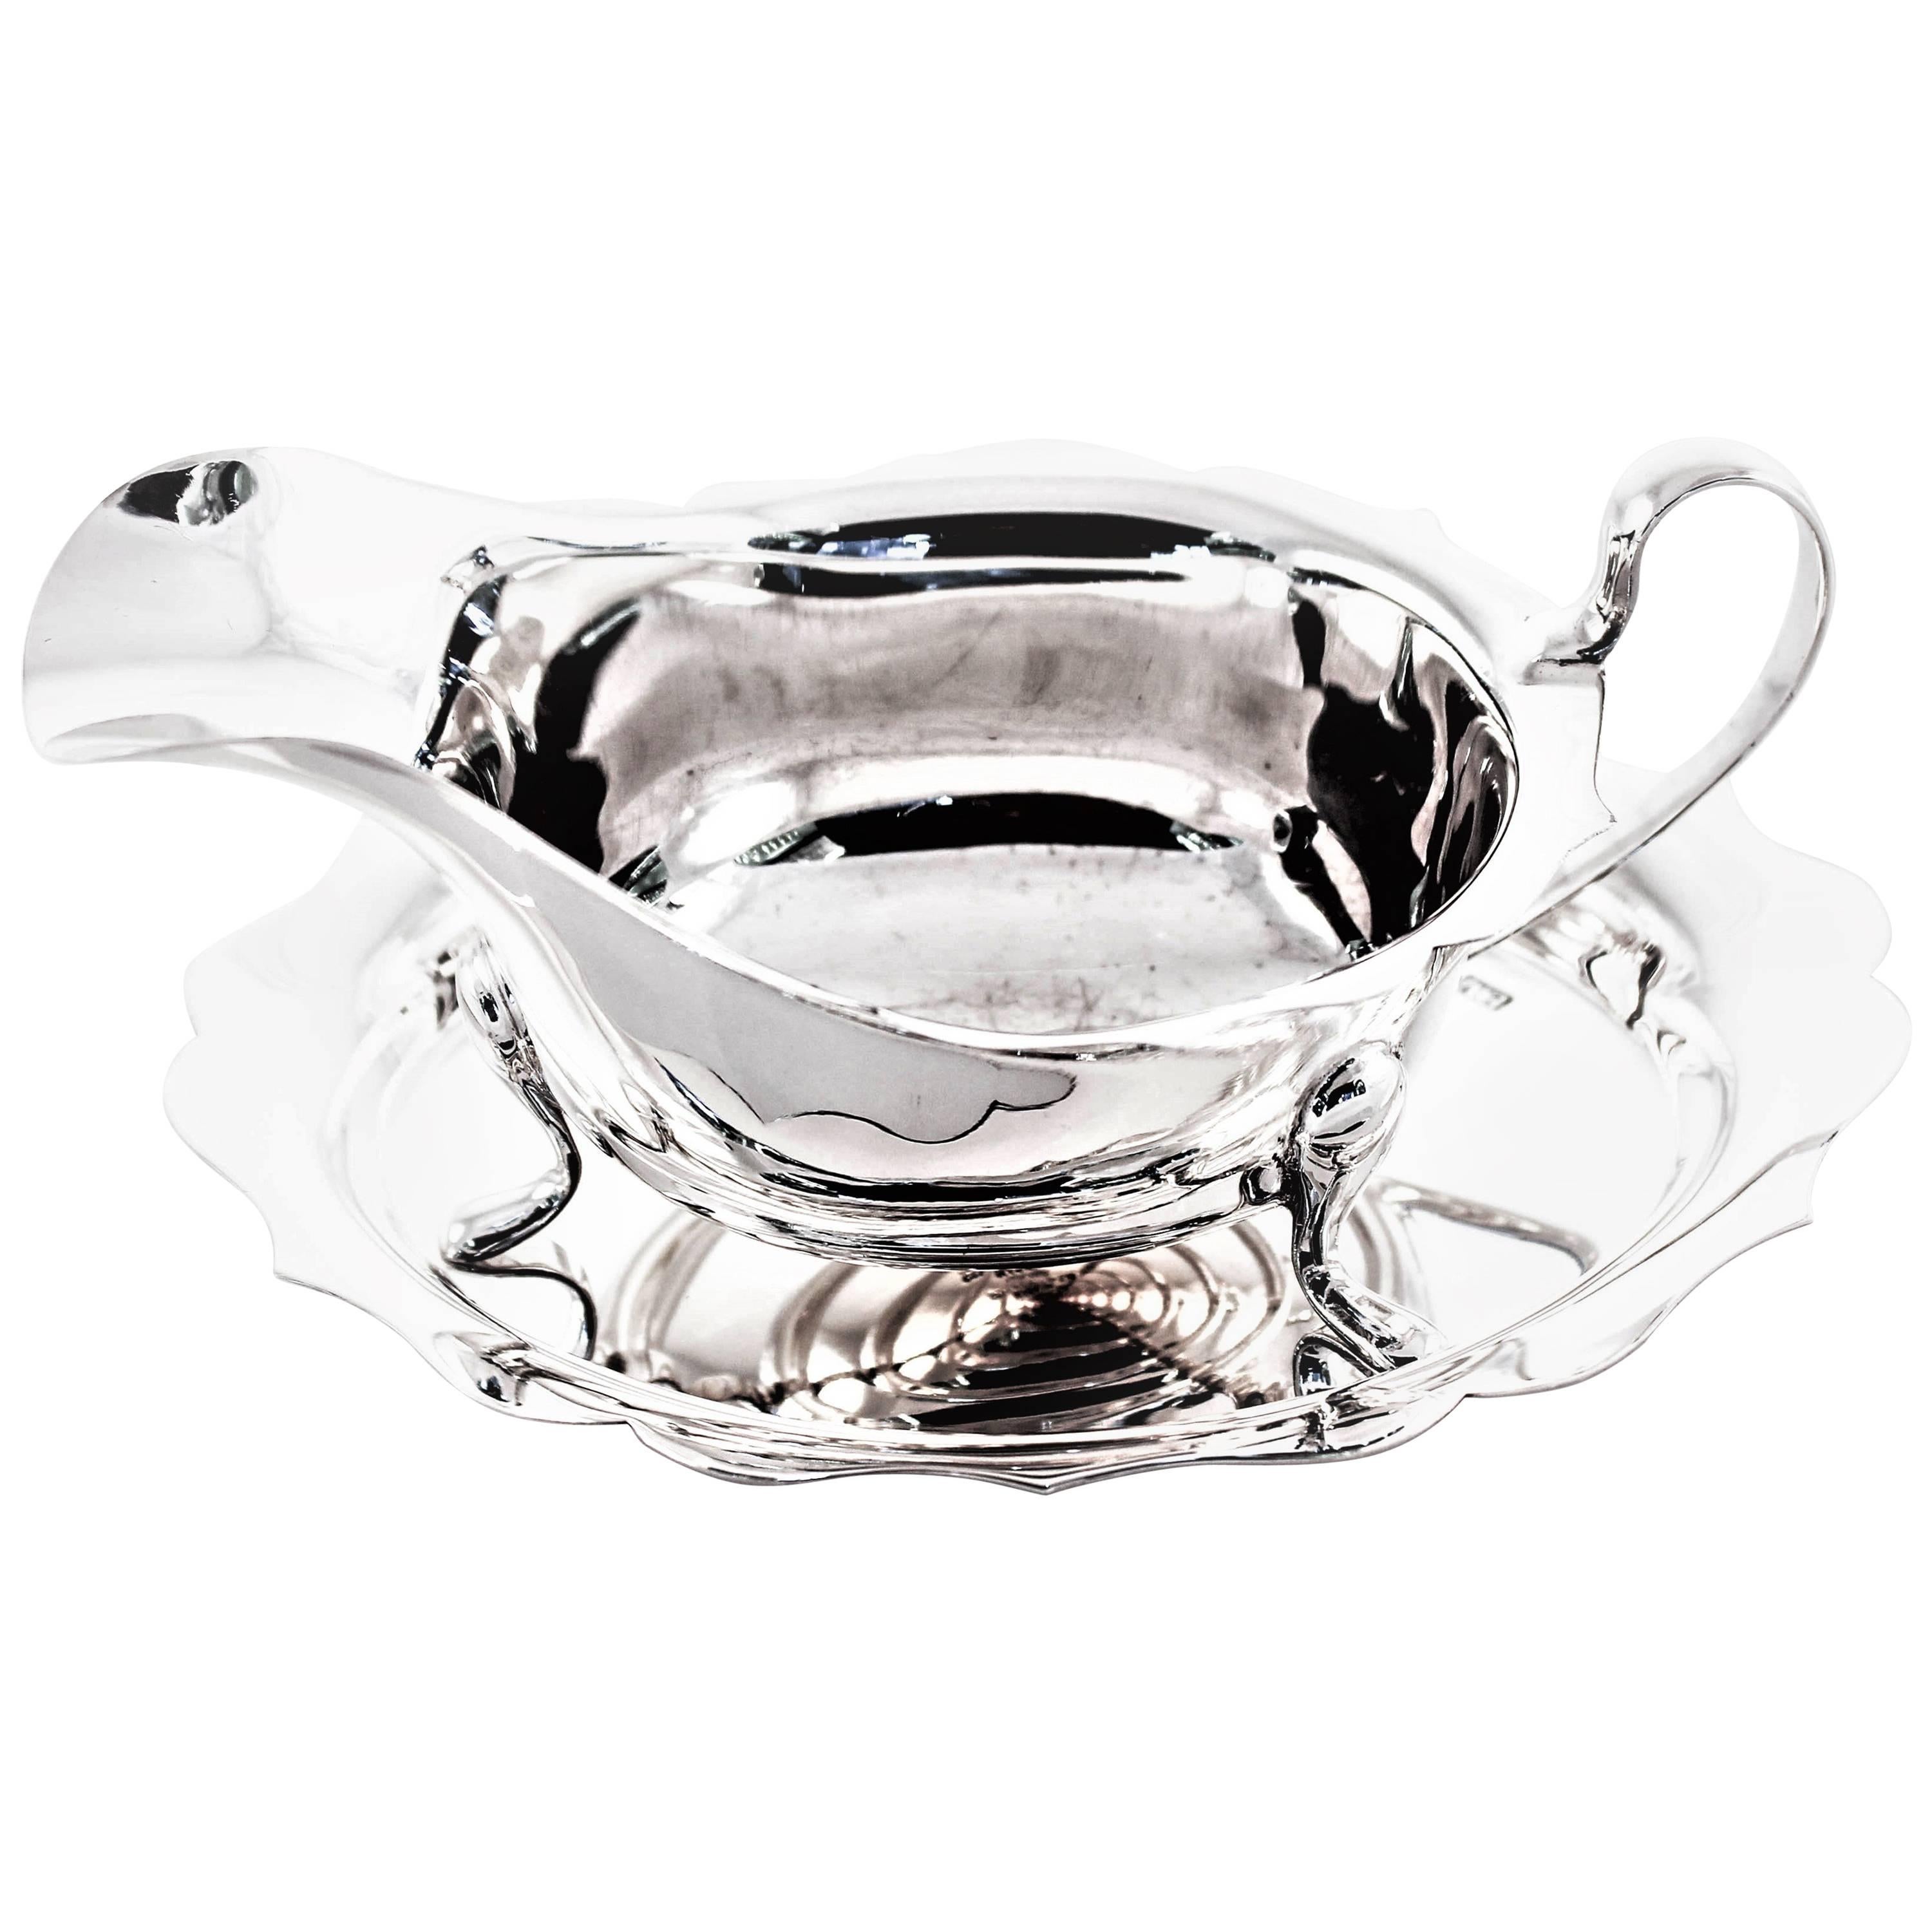 English Gravy Boat and Plate